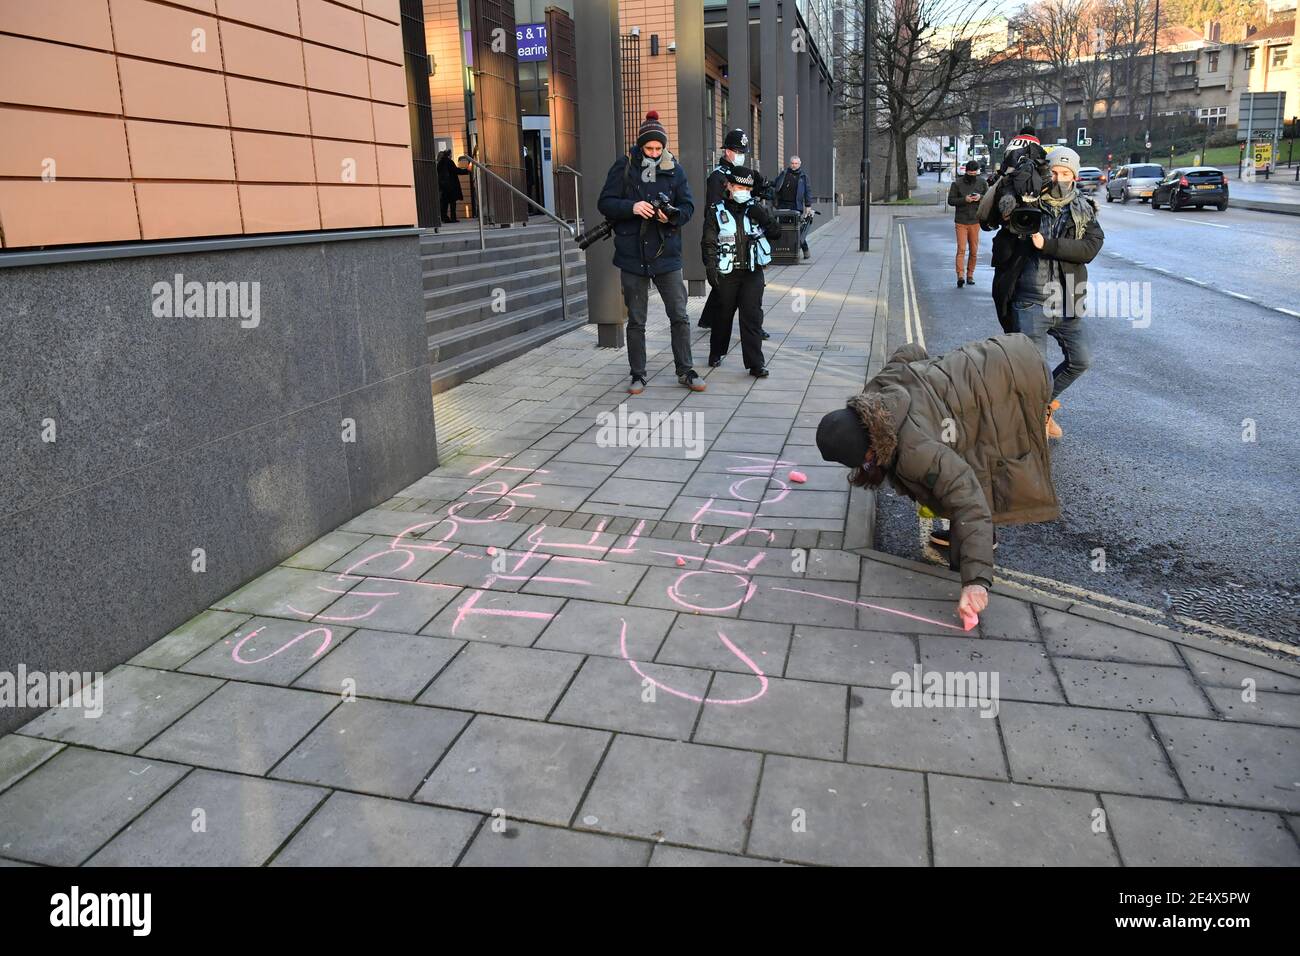 A woman writes 'Support the Colston 4' in chalk outside Bristol Magistrates' Court, where Rhian Graham, Milo Ponsford, Jake Skuse and Sage Willoughby are due to appear charged with criminal damage over the toppling of the Edward Colston statue in Bristol during the Black Lives Matter protests in June last year. Picture date: Monday January 25, 2021. Stock Photo